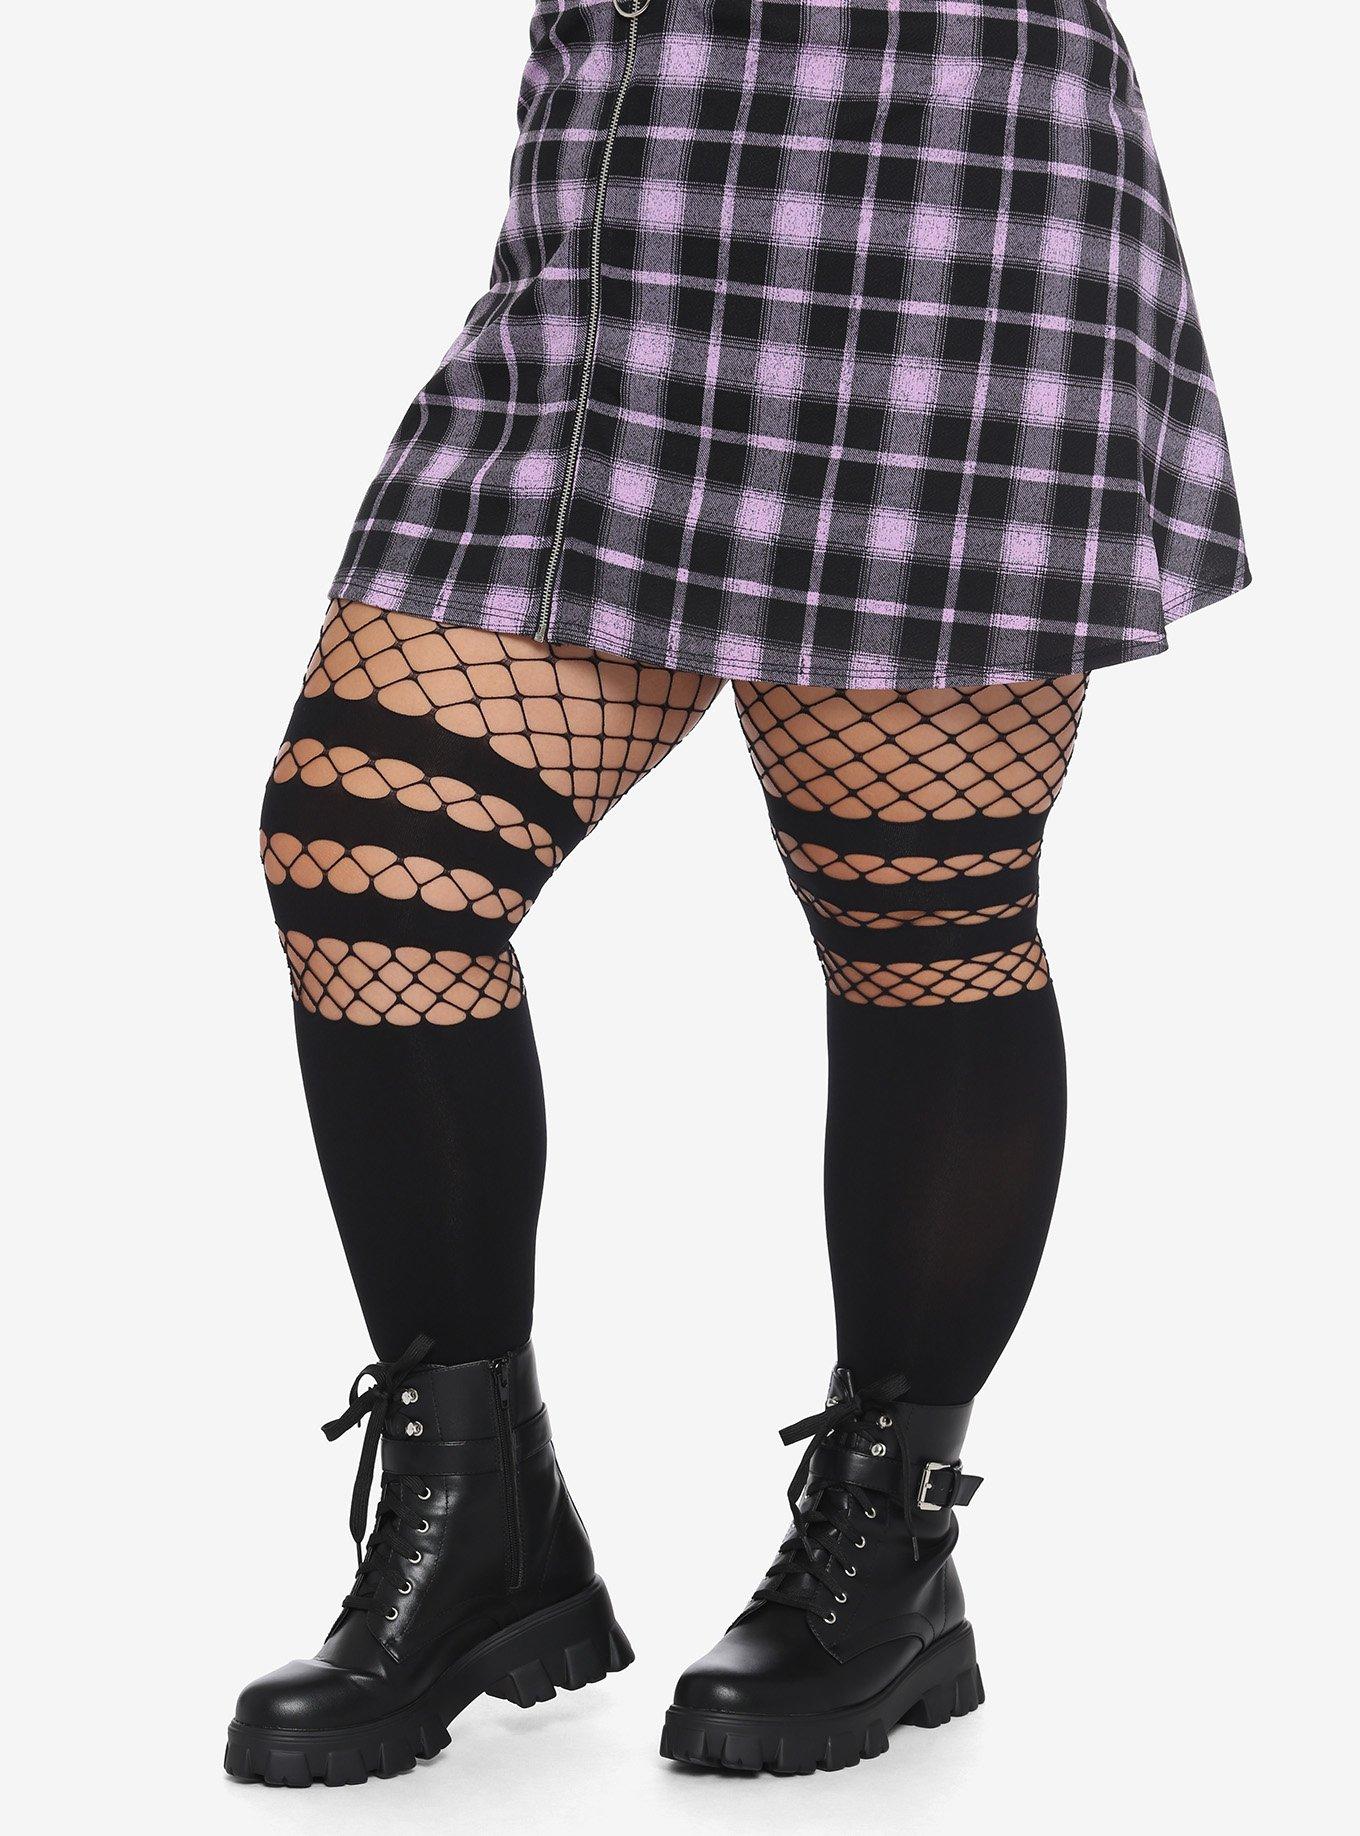 10 Places to Get Plus Size Tights and Thigh Highs (Extended Sizes